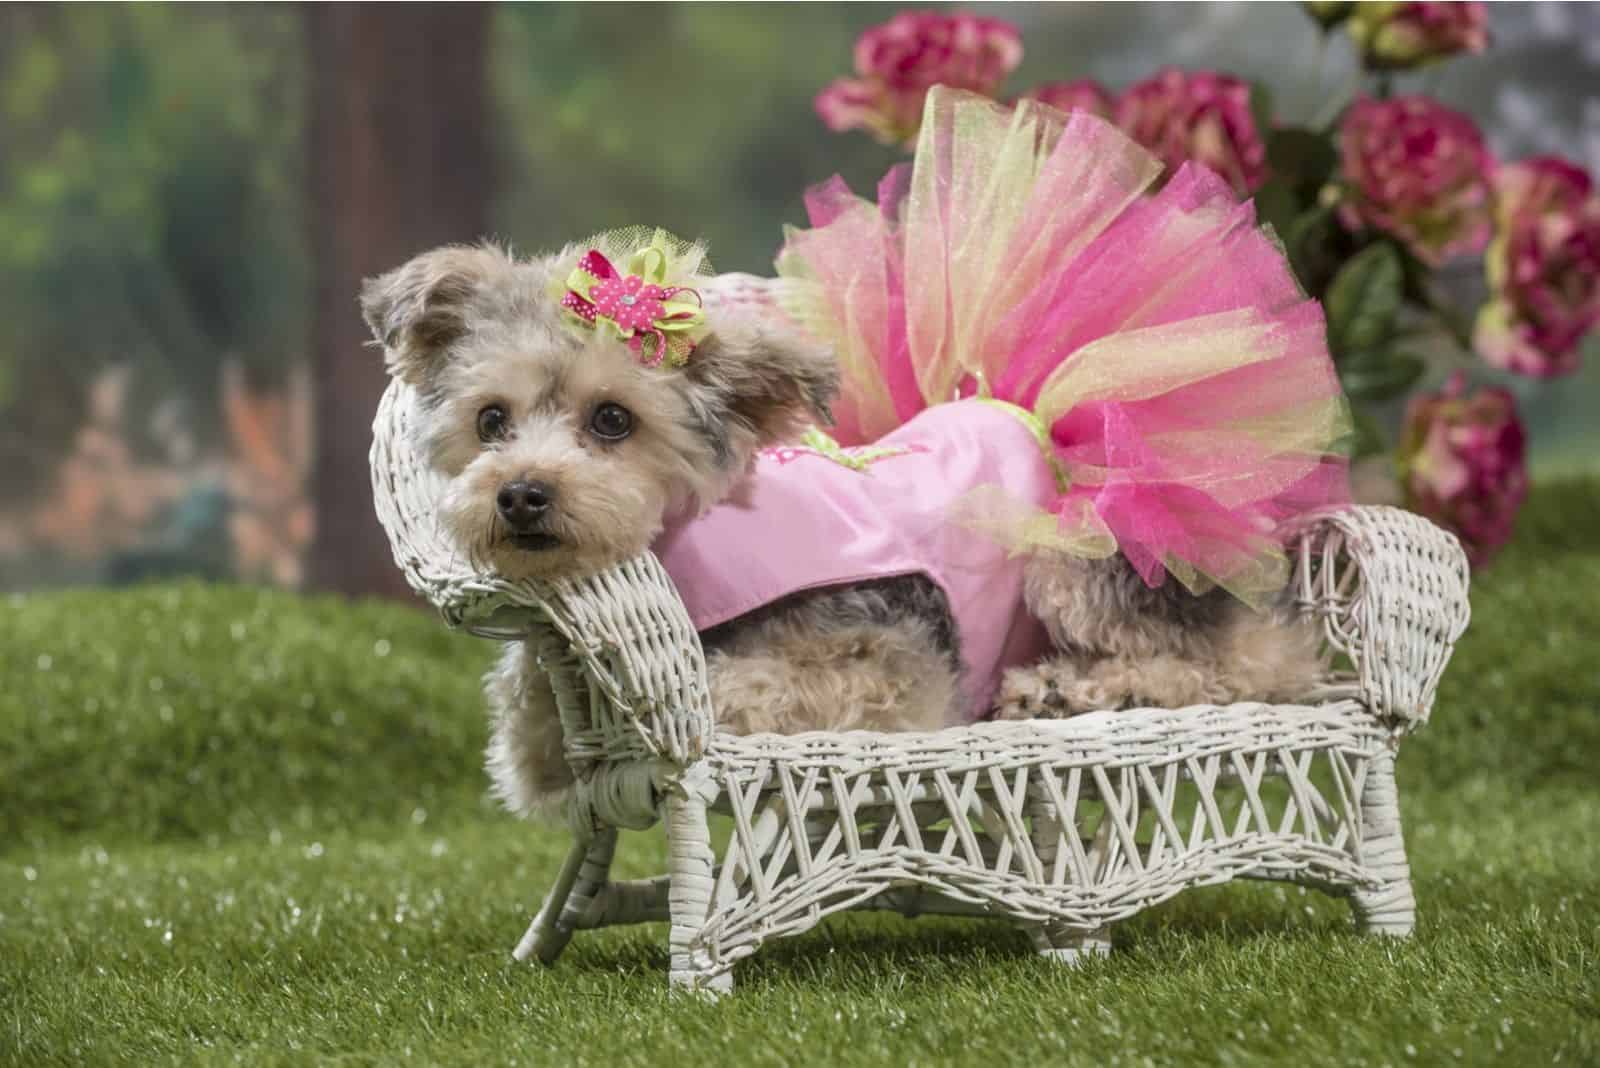 Yorkiepoo Dogs: The Poodle Yorkshire Terrier Designer Breed